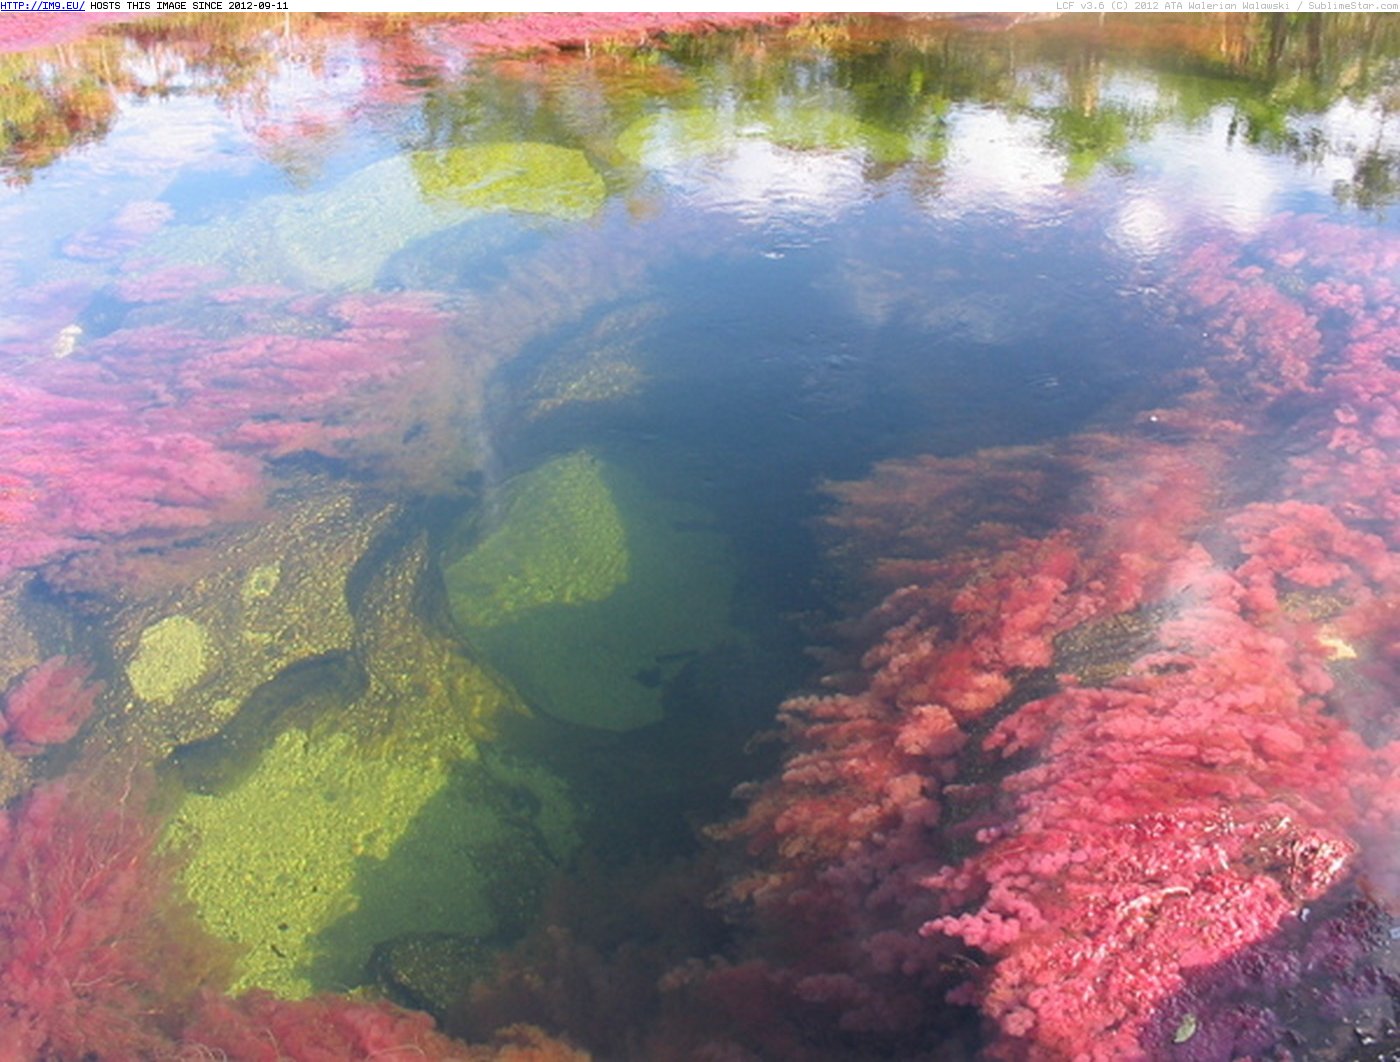 Cano Cristales River (in Random images)